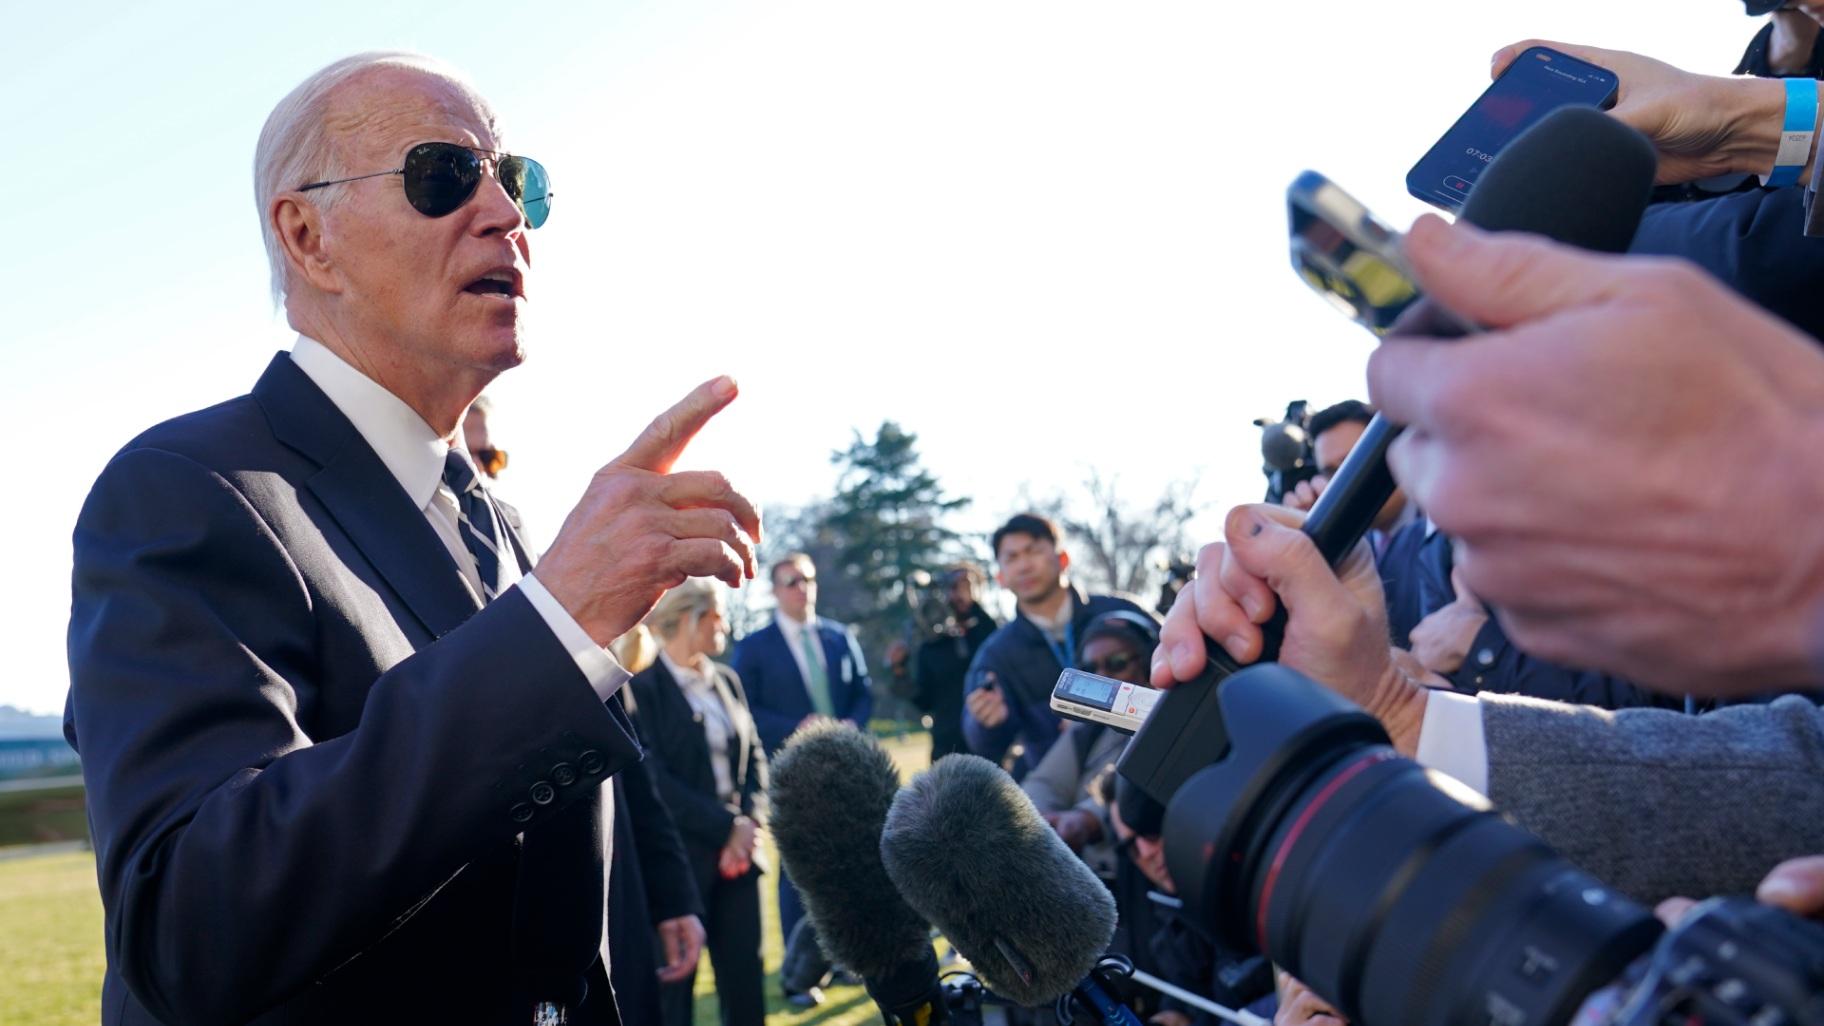 President Joe Biden talks with reporters on the South Lawn of the White House in Washington, Monday, Jan. 30, 2023, after returning from an event in Baltimore on infrastructure. (AP Photo / Susan Walsh)